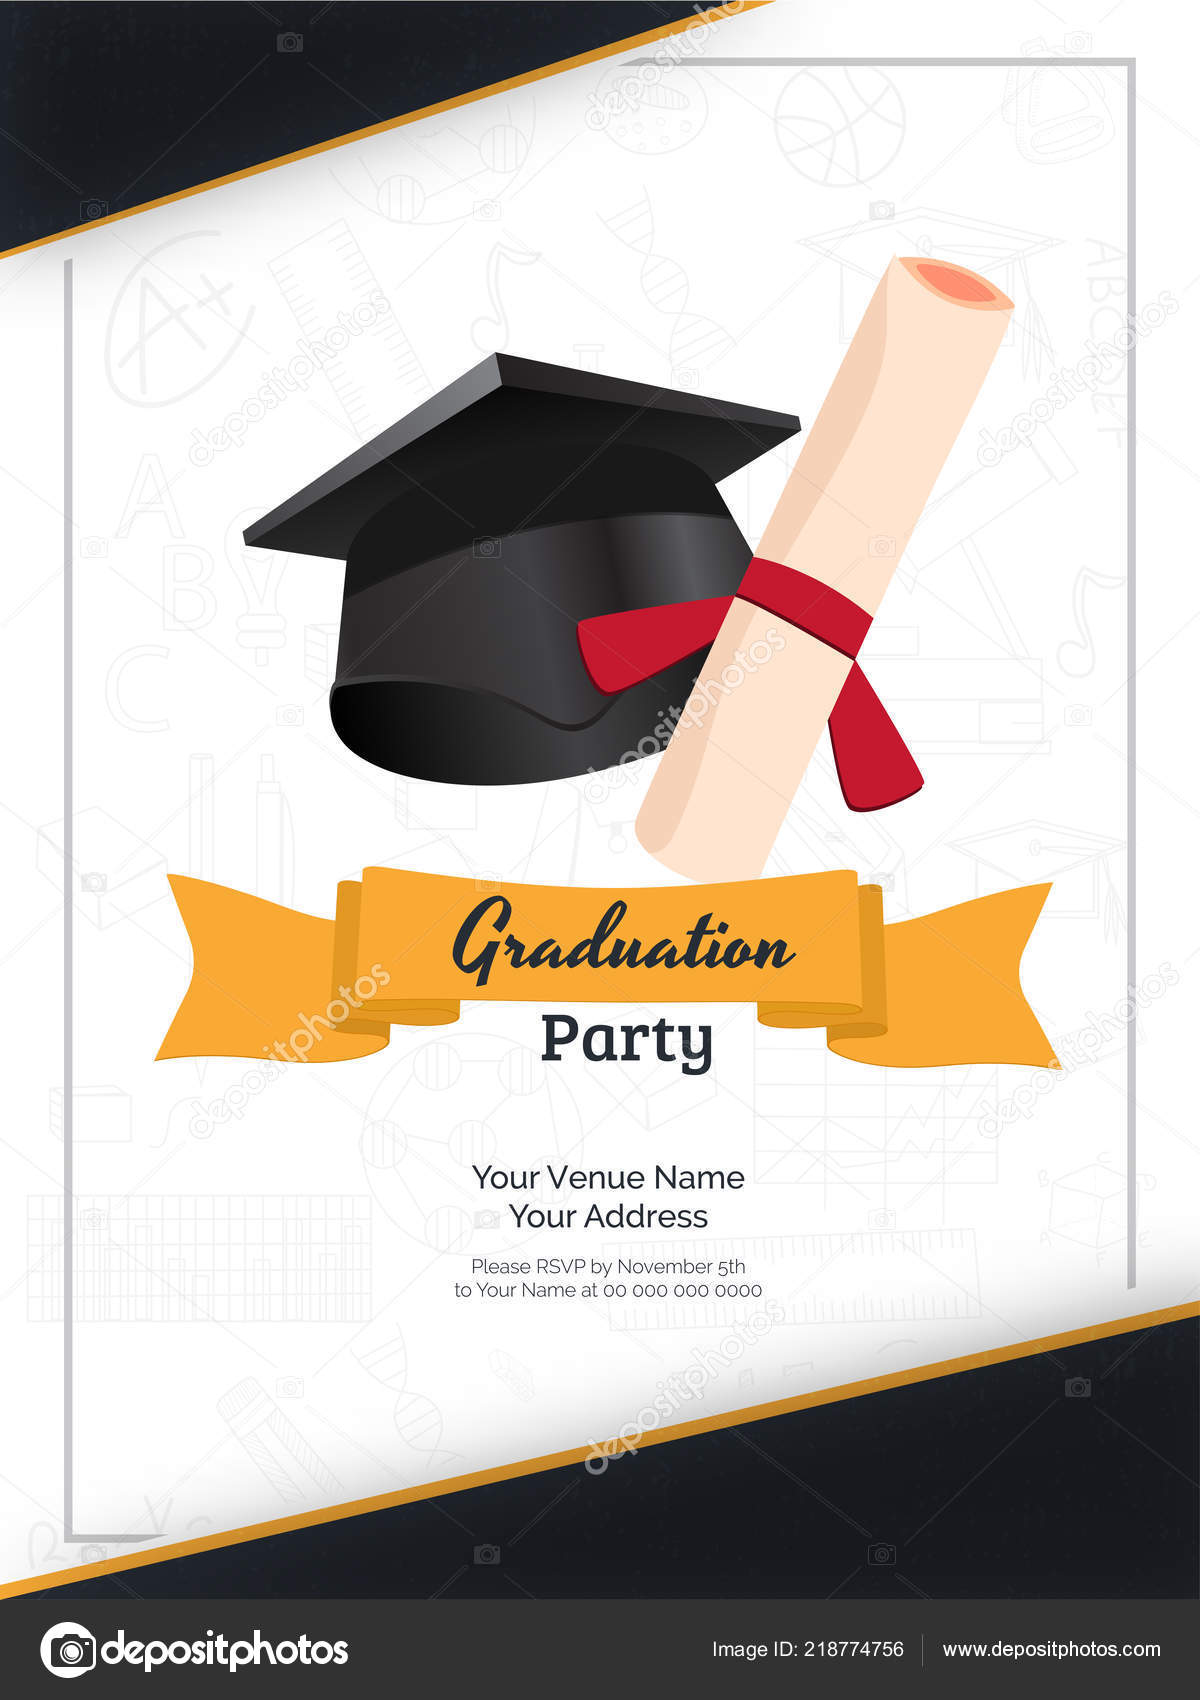 Graduation Party Invitation Card Template Design Illustration Within Graduation Party Flyer Template